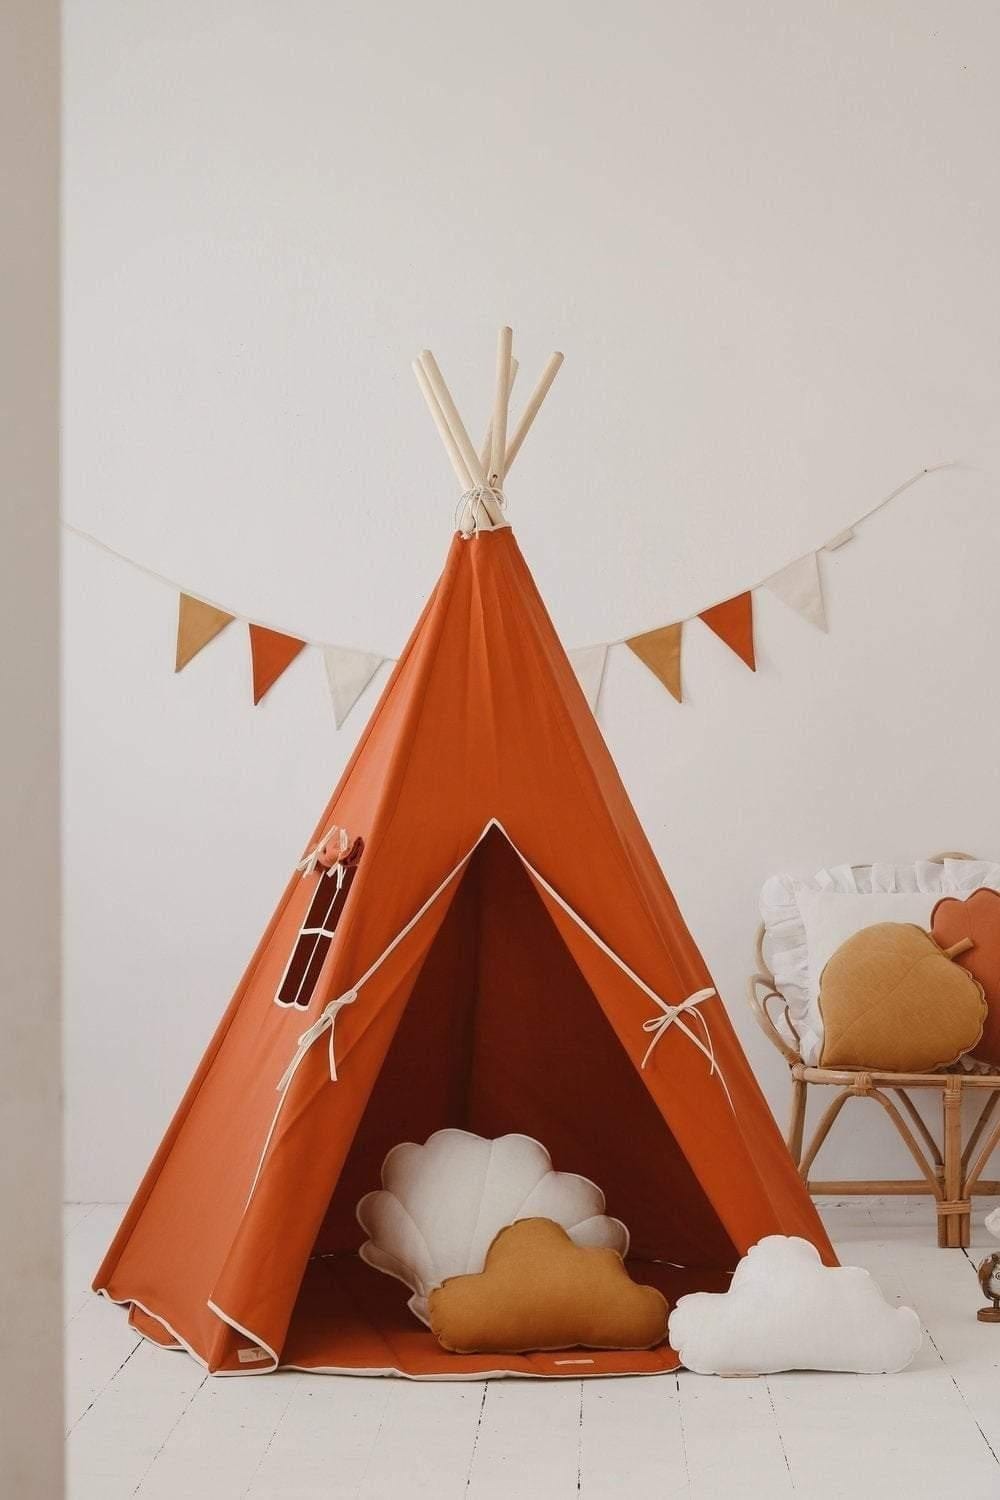 moimili.us Set teepee with mat Moi Mili “Red Fox” Teepee and Round Mat Set